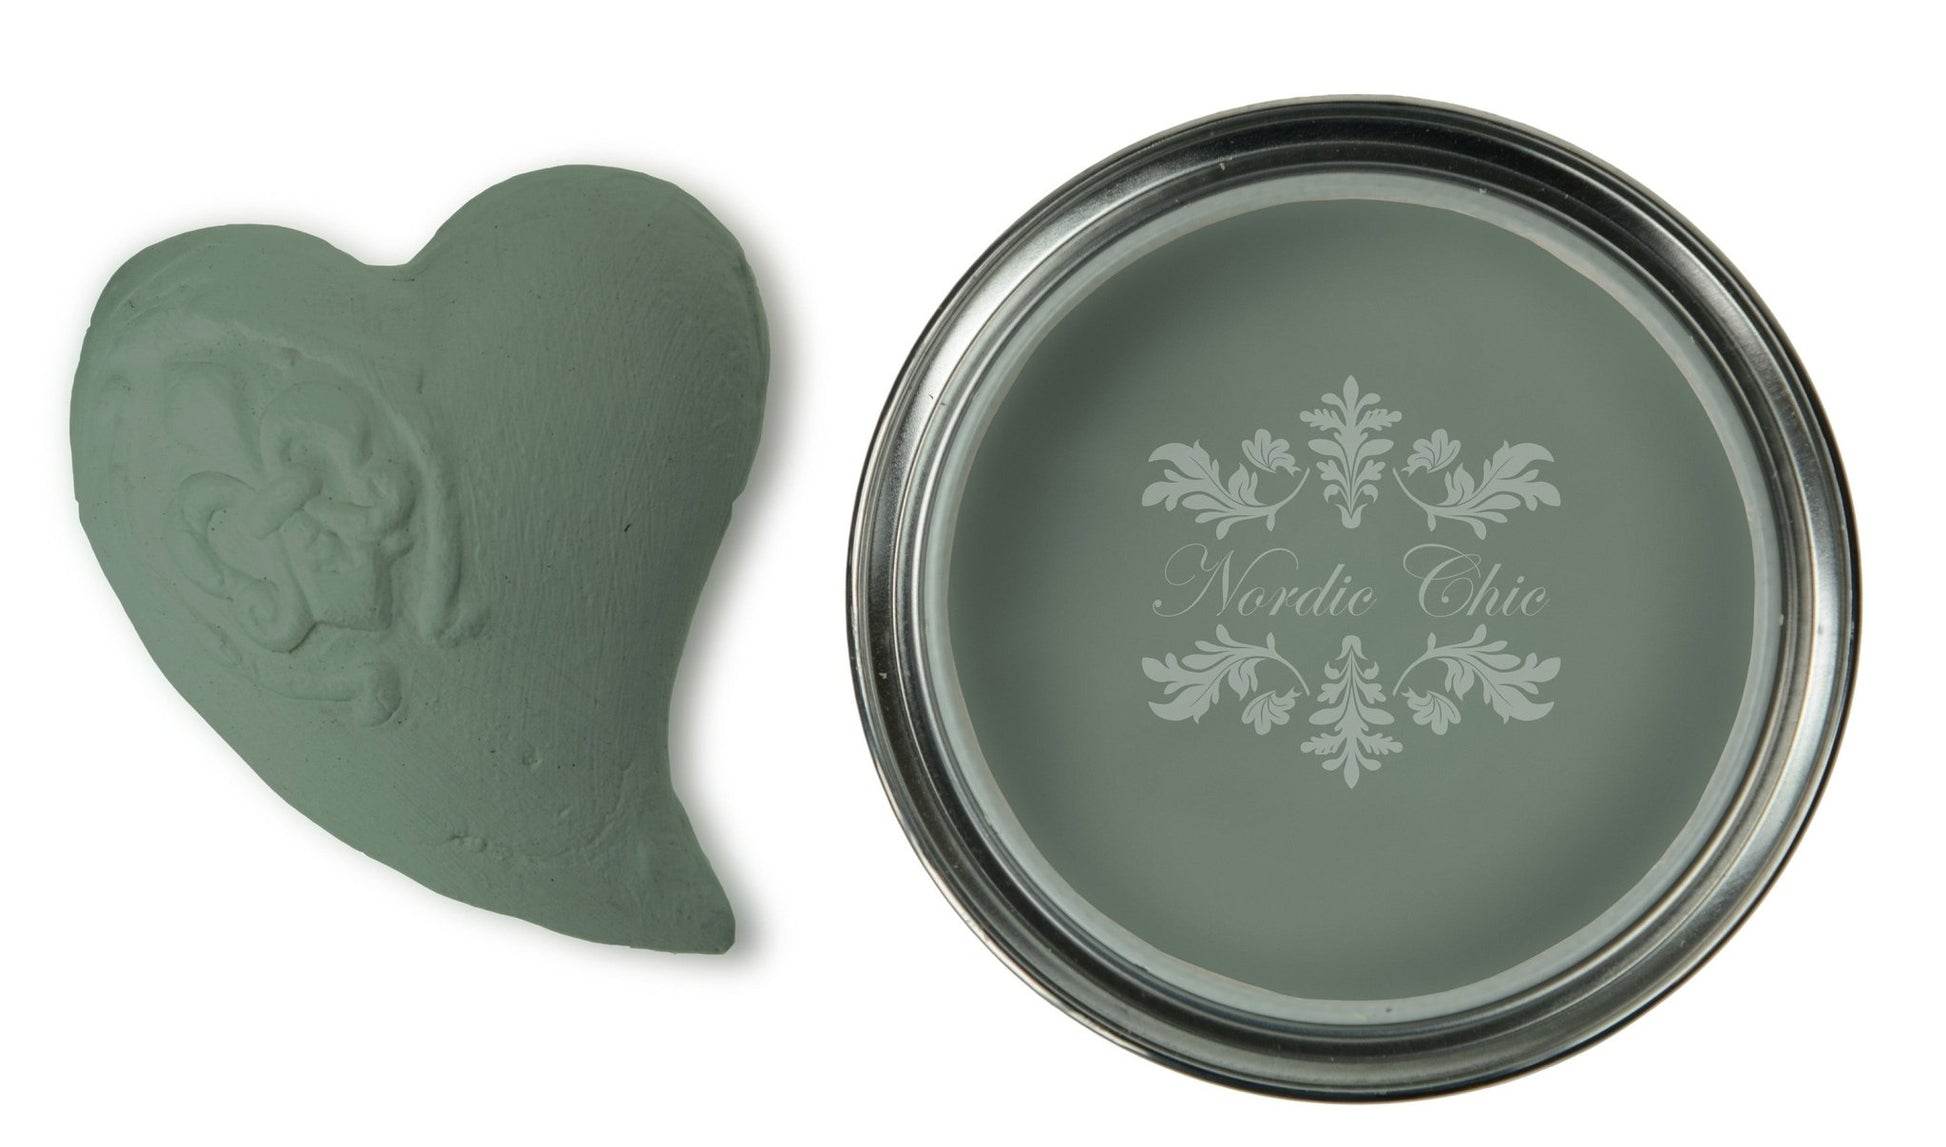 Nordic Chic Furniture Paint - Dusty Green - Nordic Chic®